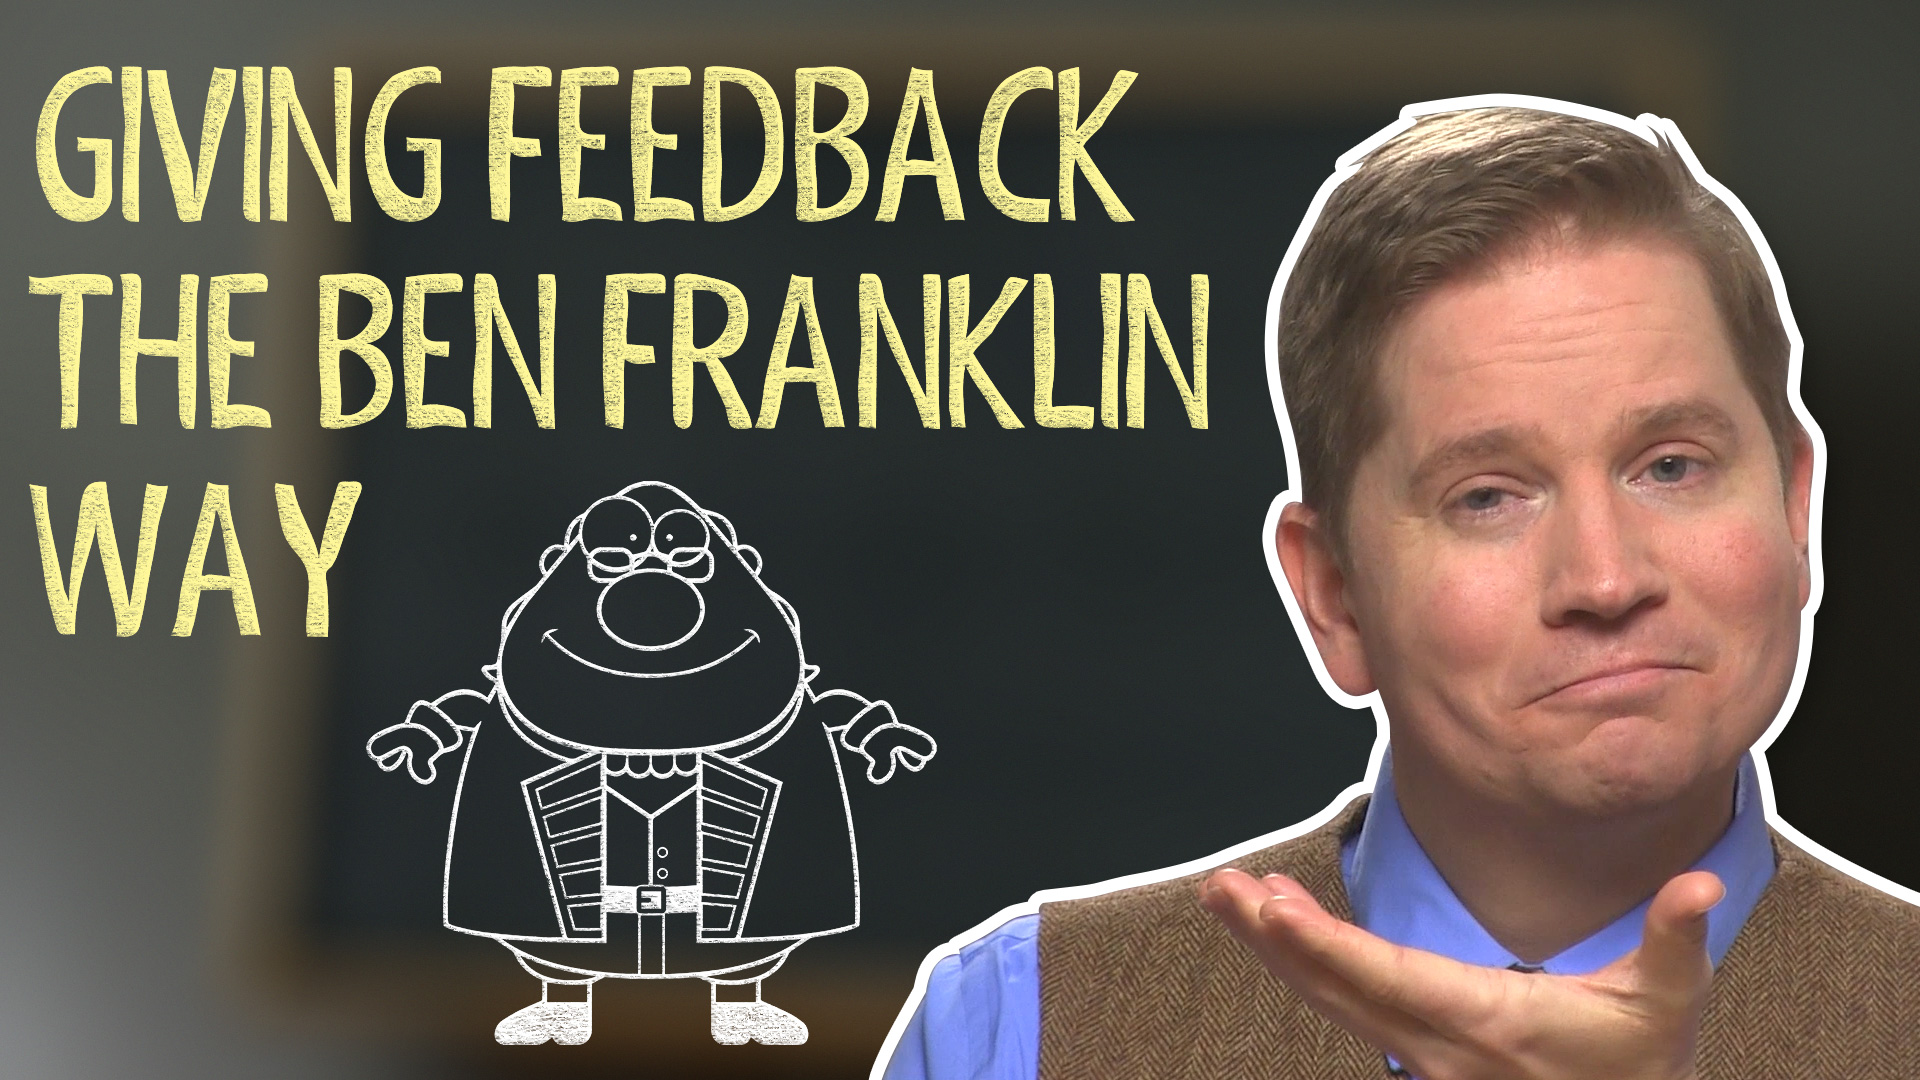 What Ben Franklin can teach us about giving feedback